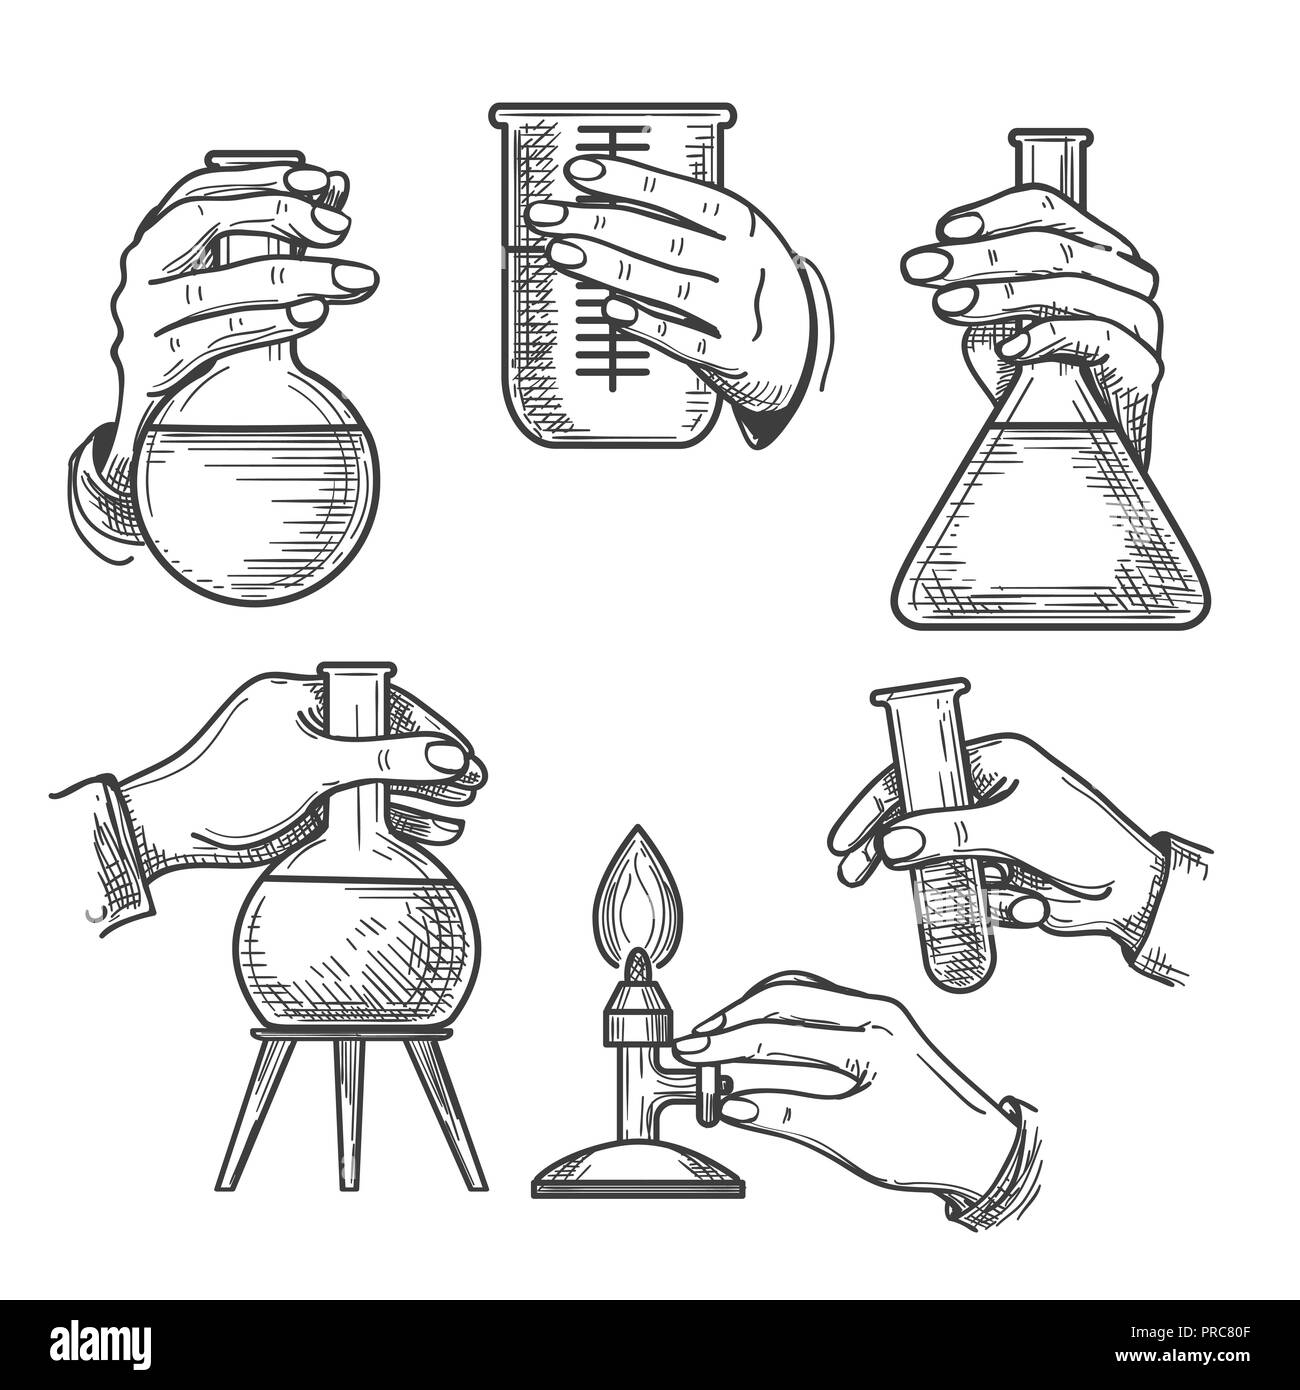 Sketch of objects of a chemical laboratory.... - Stock Illustration  [86566740] - PIXTA